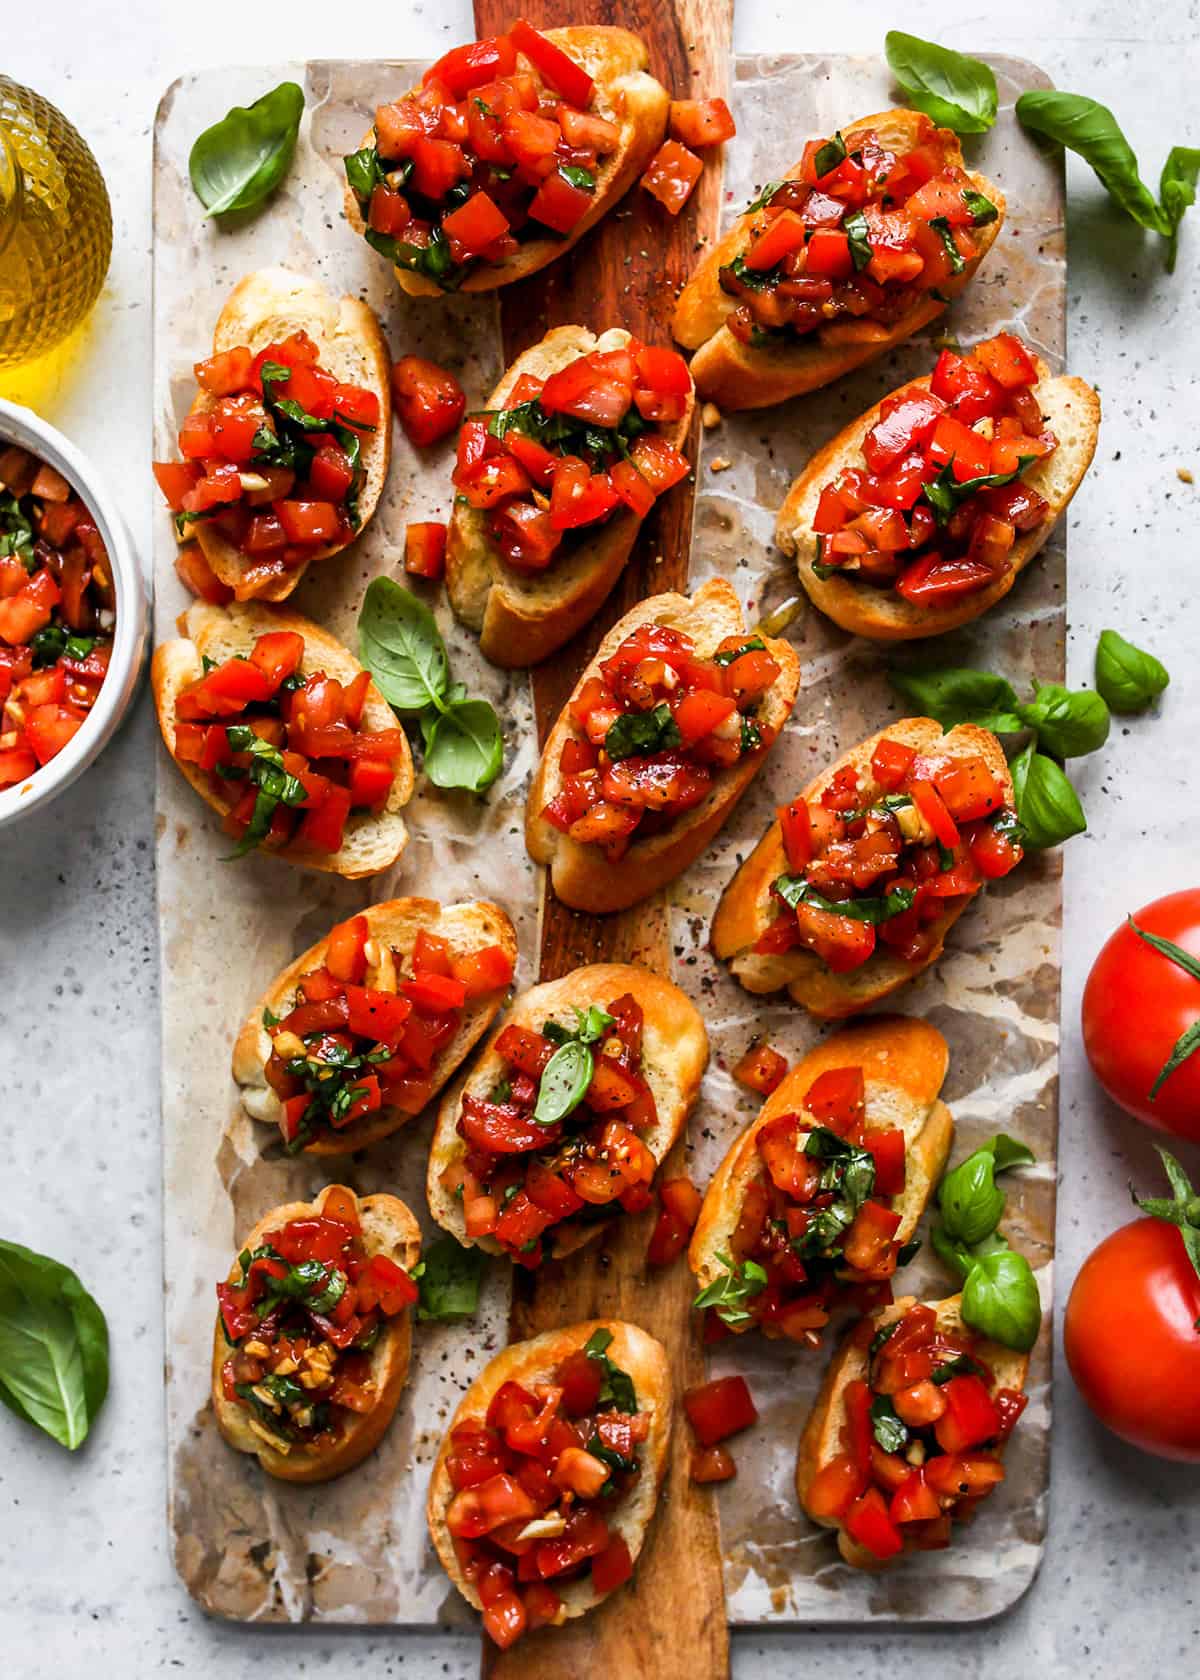 14 pieces of bread topped with tomato bruschetta on a board for serving